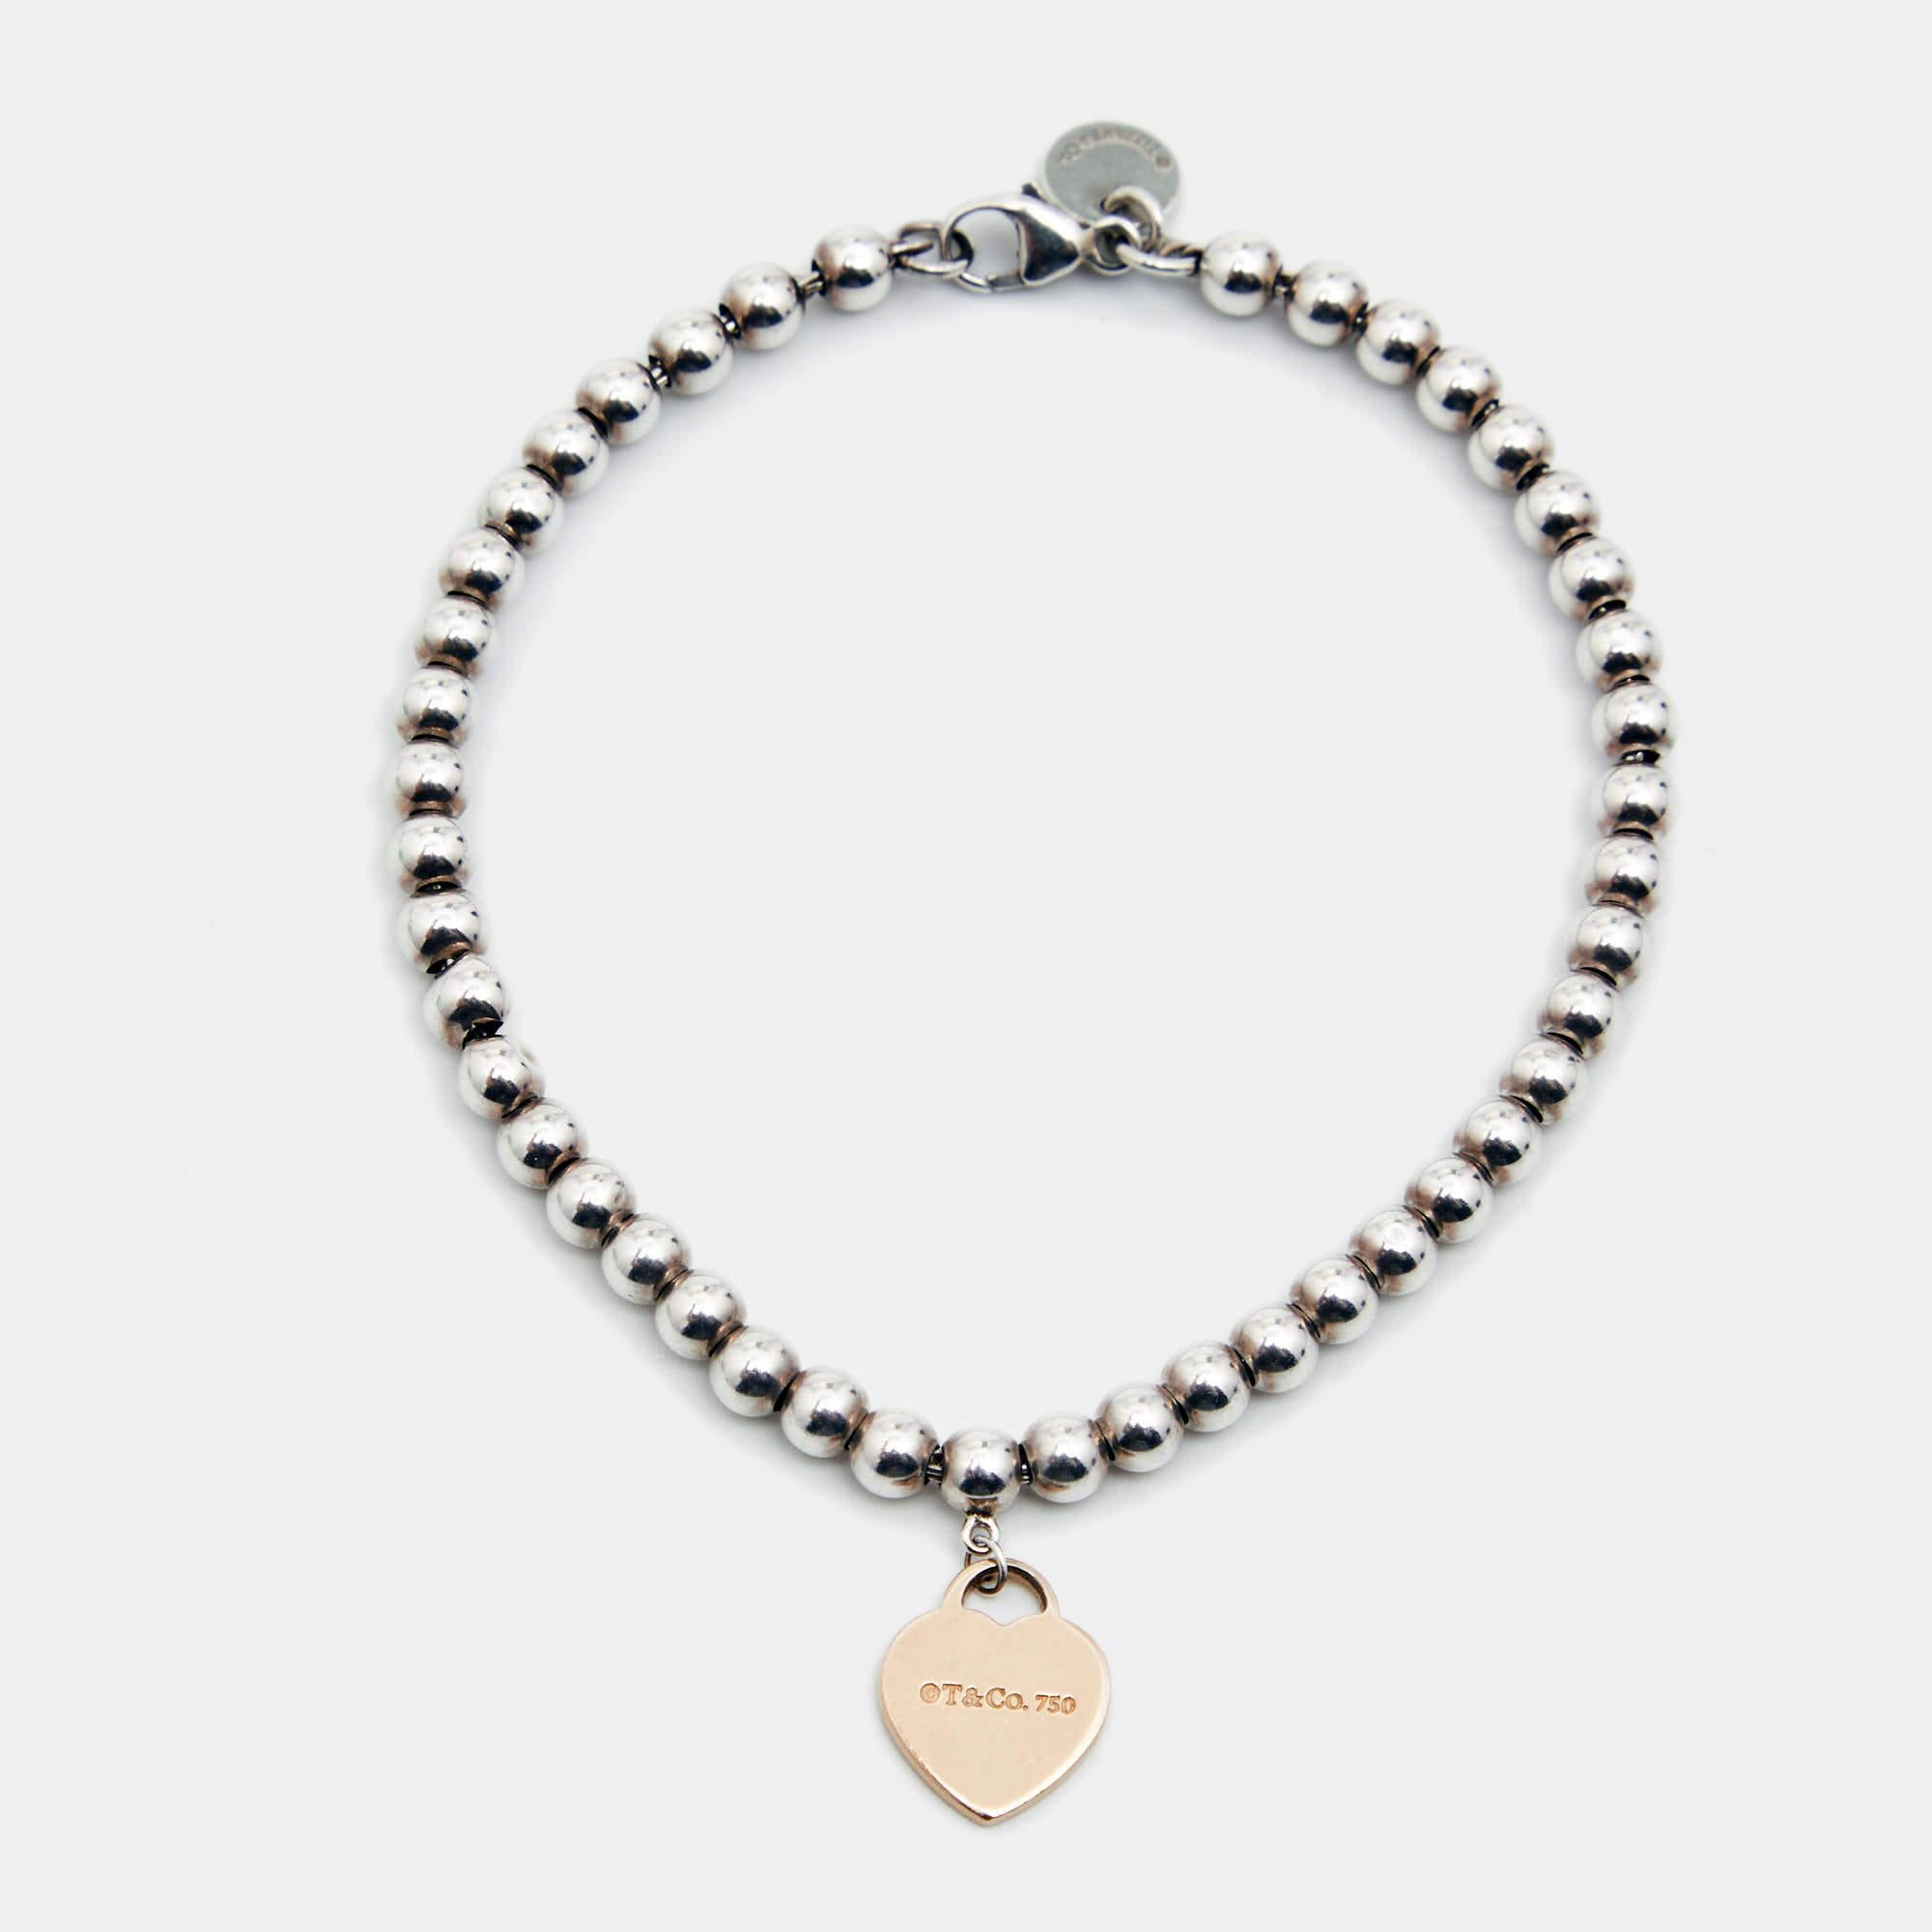 This Tiffany & Co. silver bracelet is from the famous collection titled Return To Tiffany. Crafted from sterling silver, the elegant piece carries an 18k rose gold heart pendant with engravings on the back and a bead bracelet with a lobster clasp.